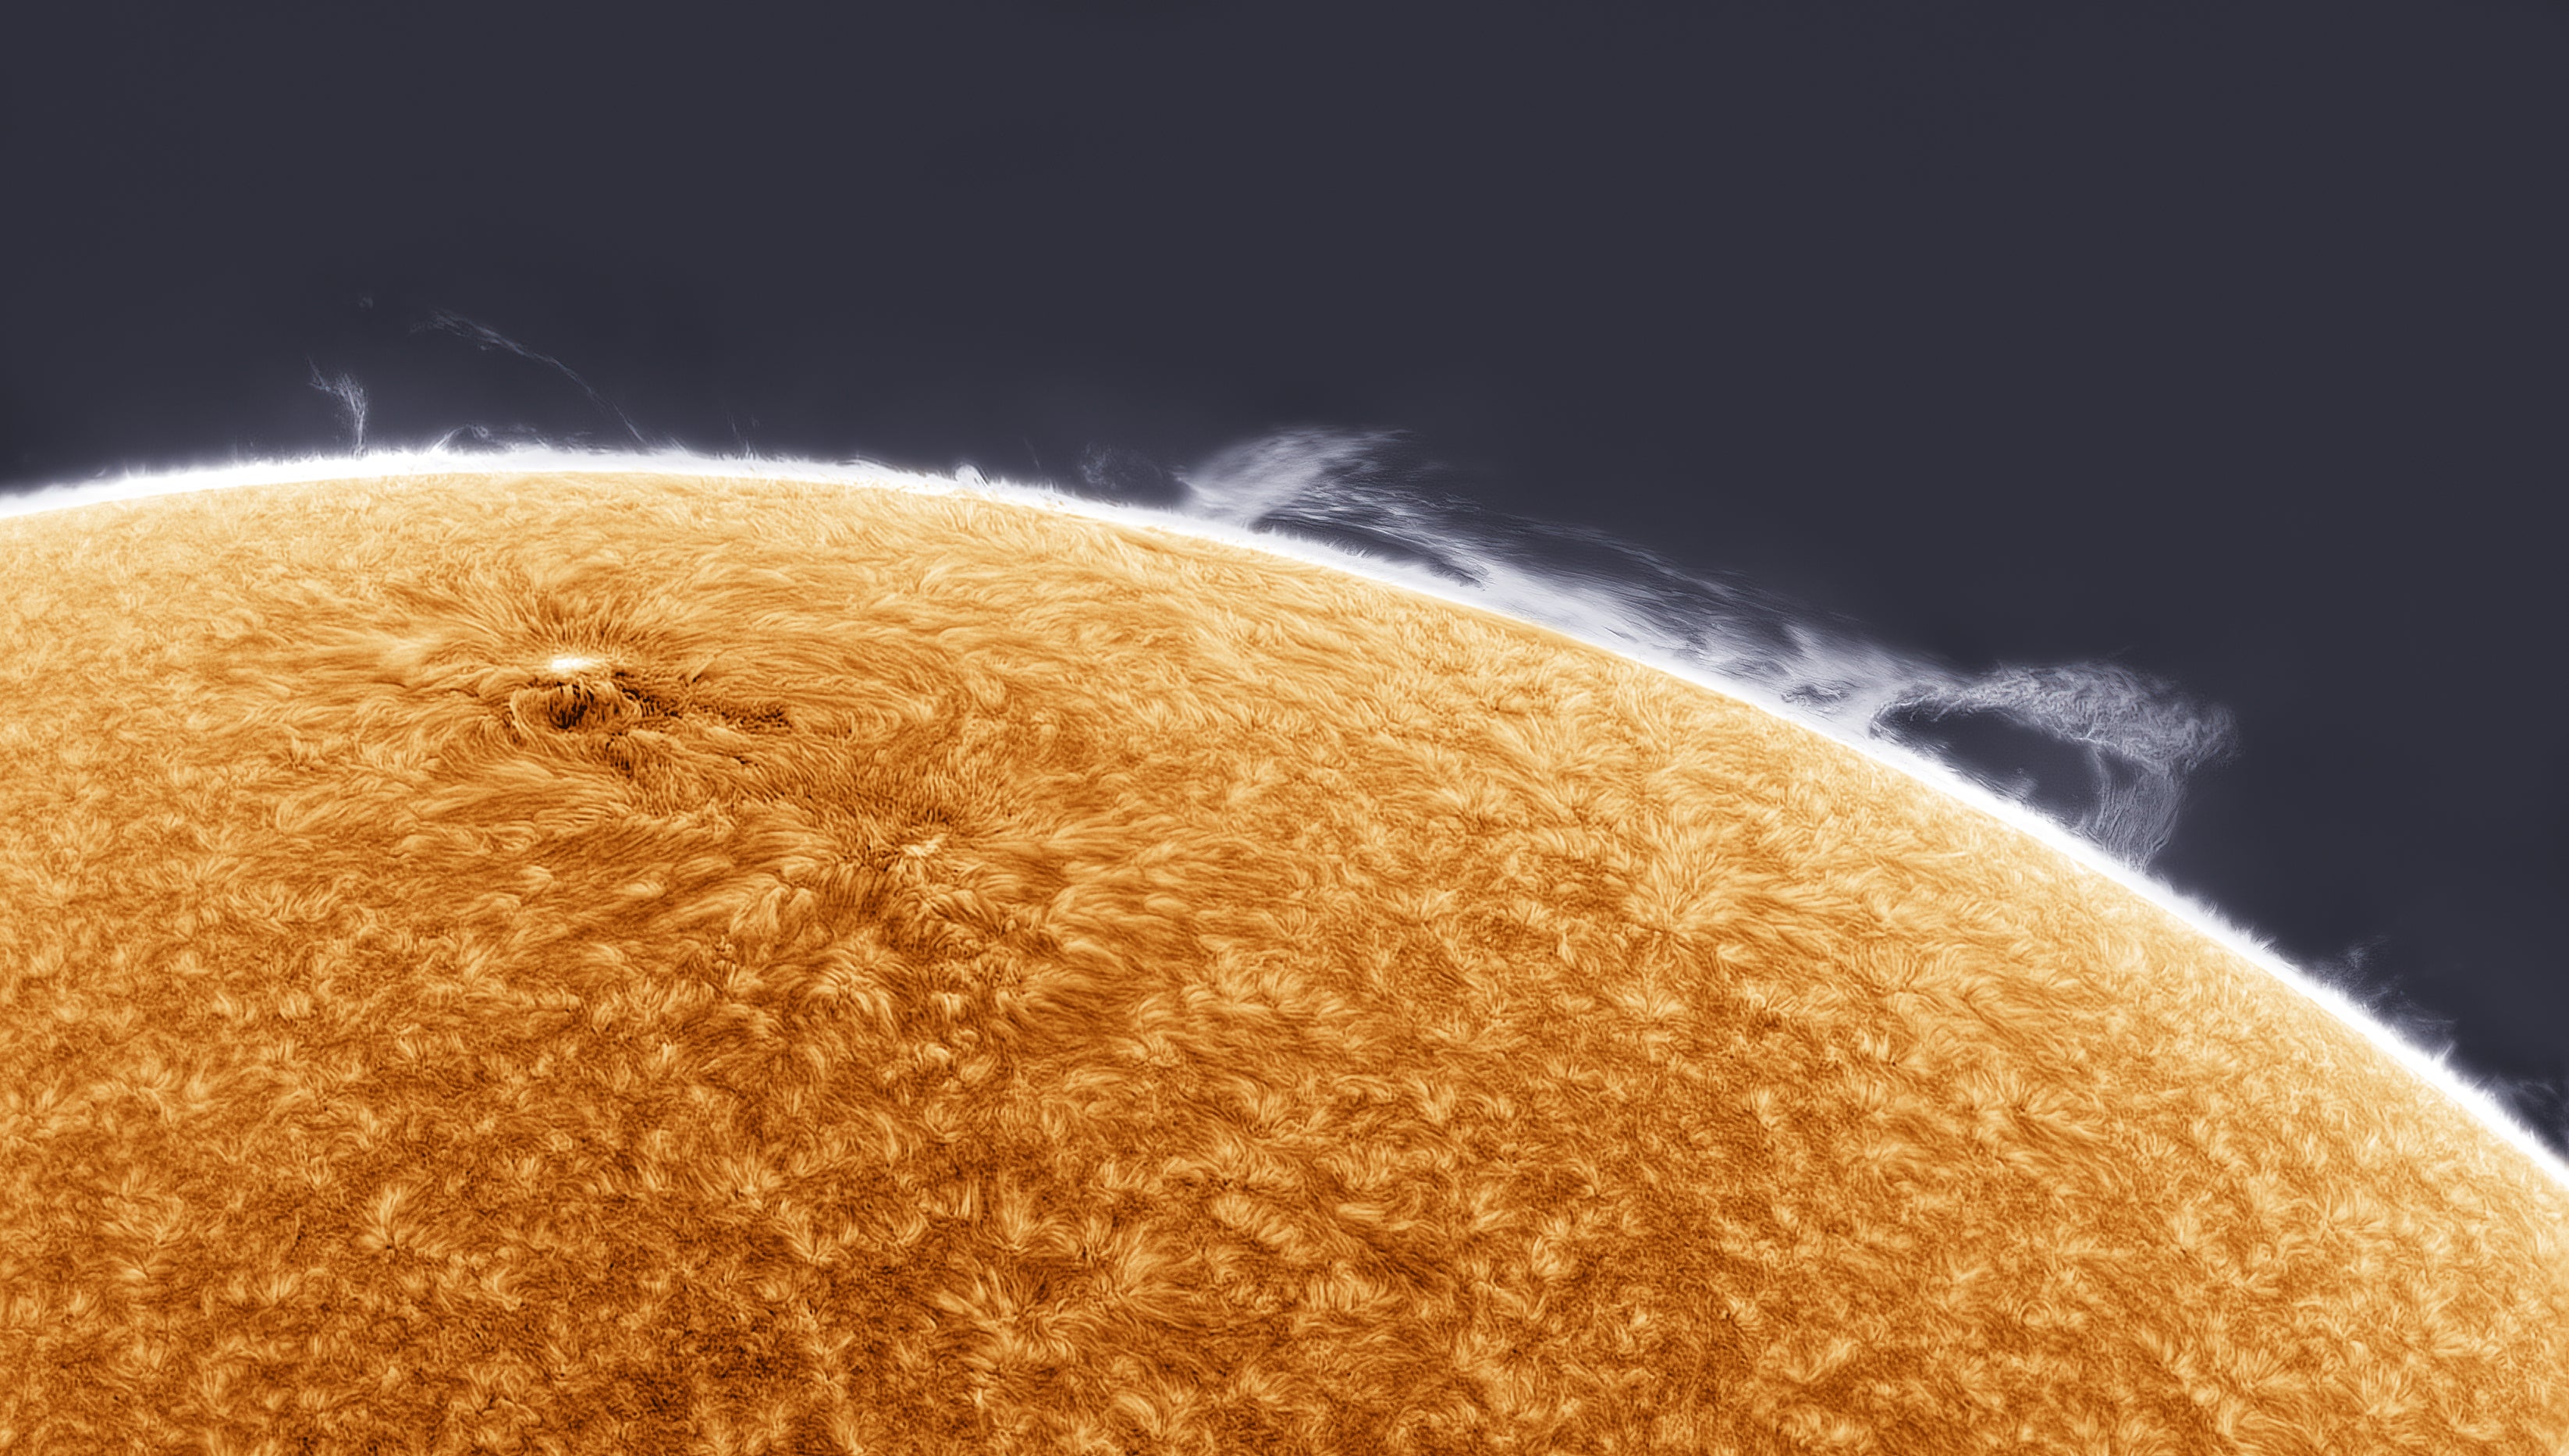 Wisps of gas above the Sun's surface. (Image: © Simon Tang)